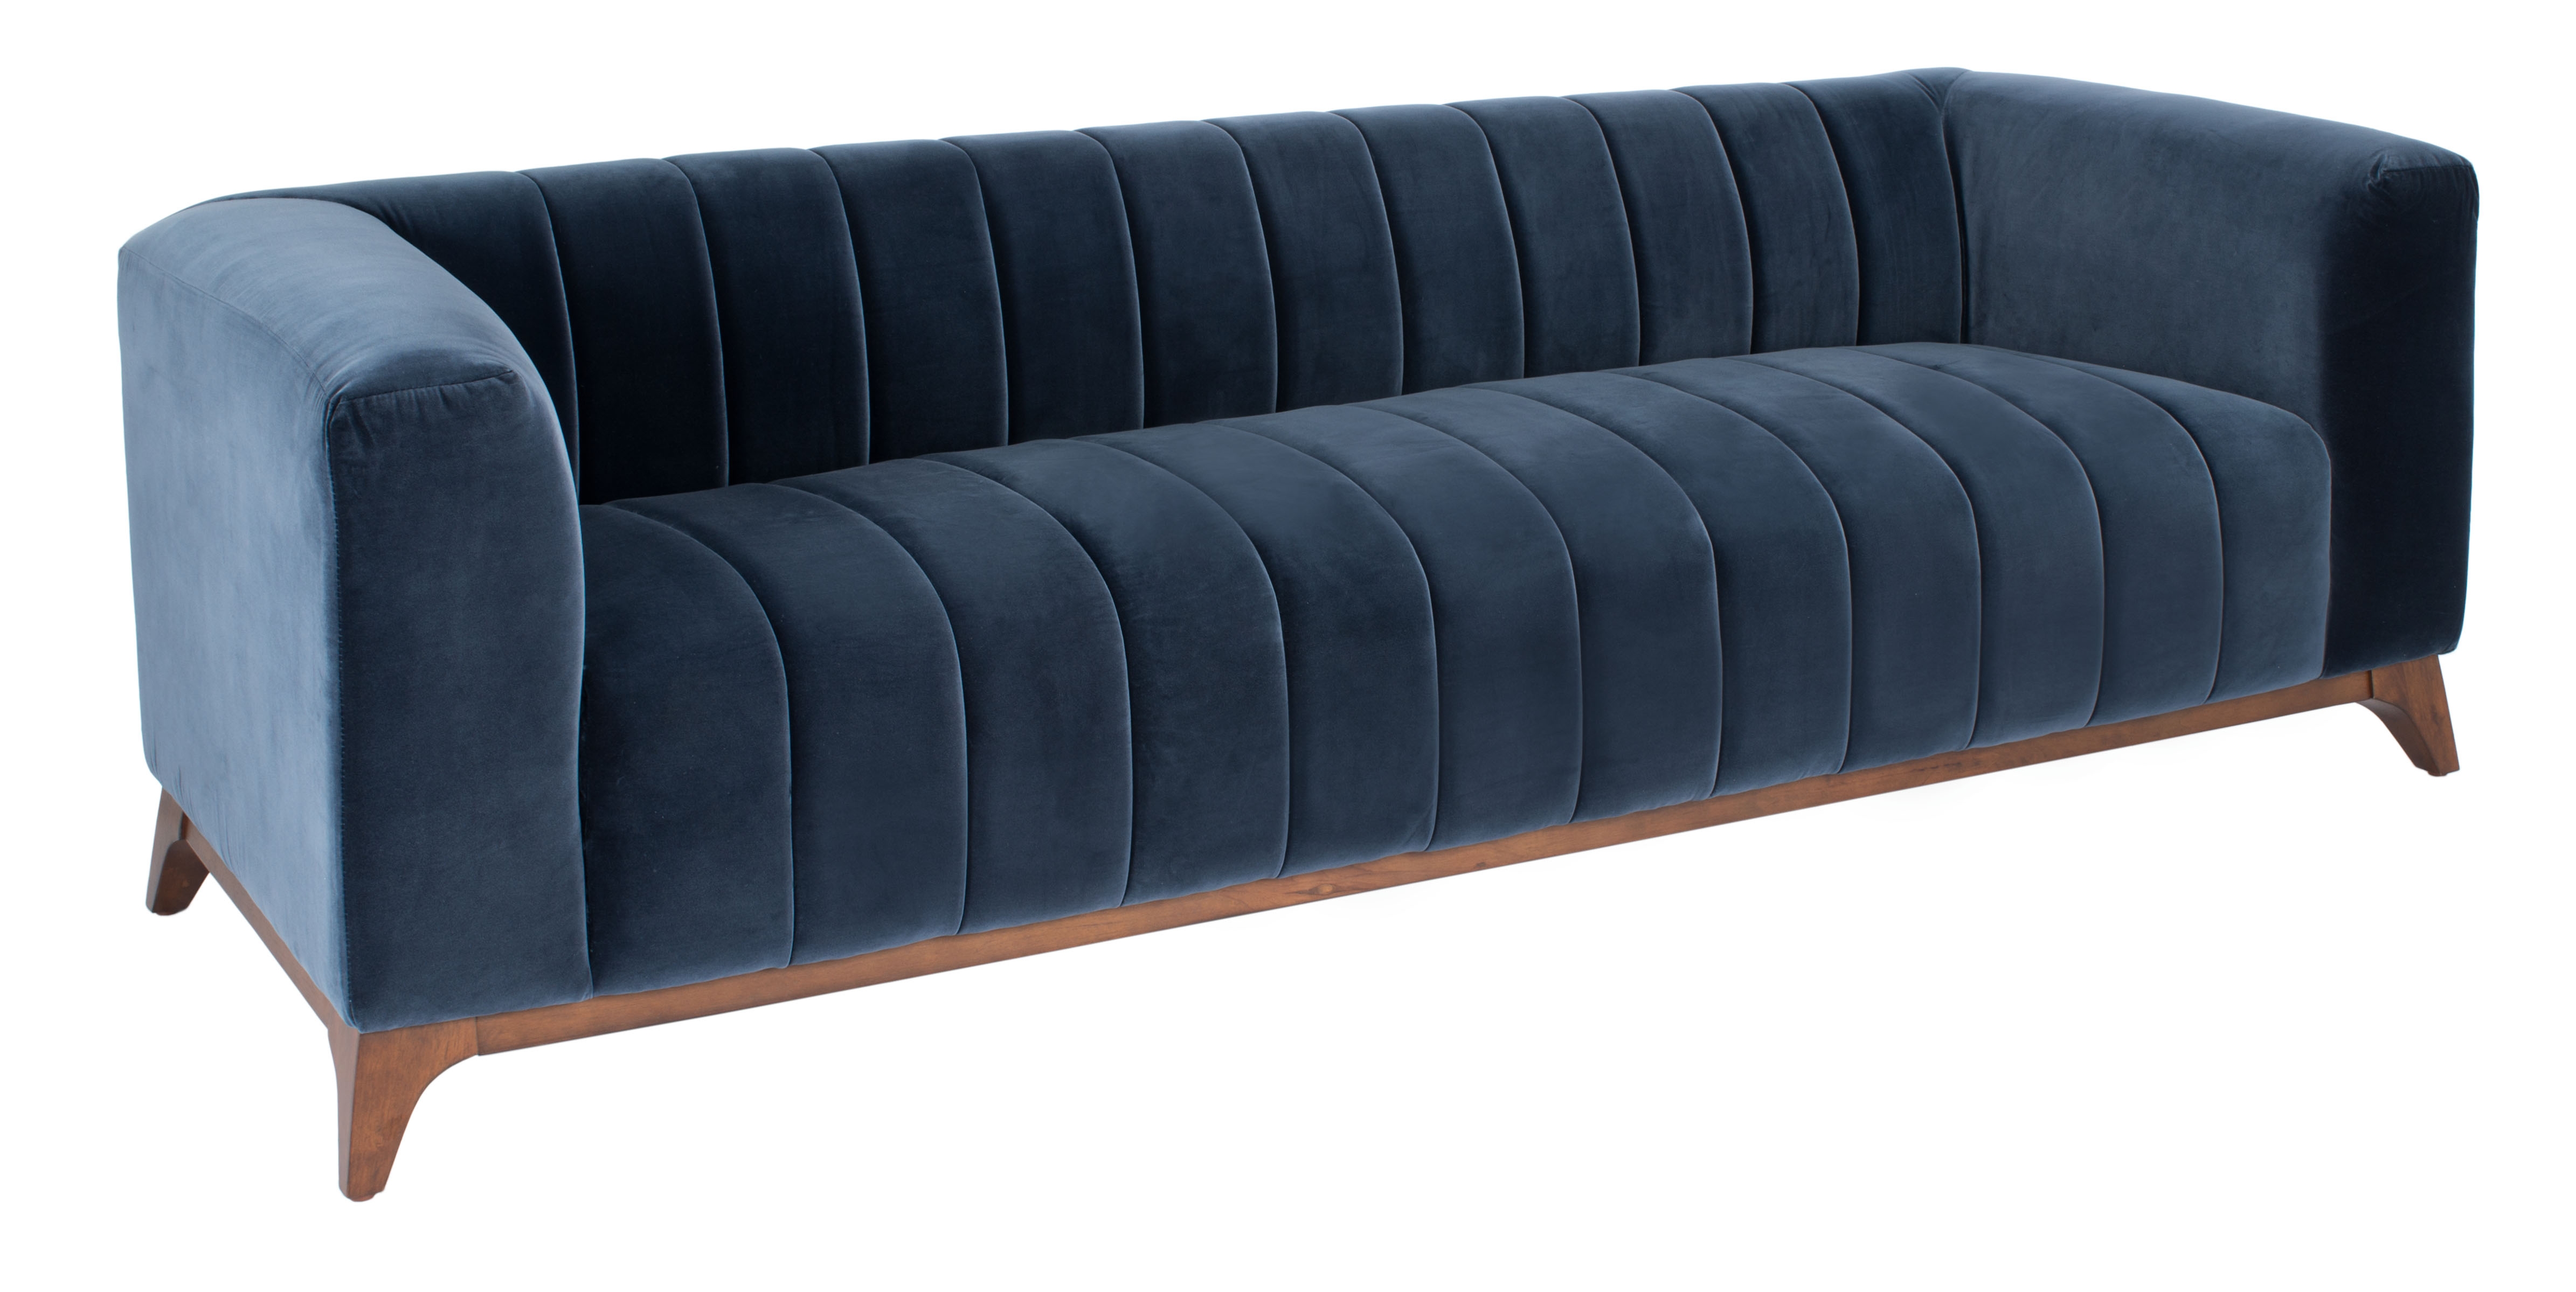 Dixie Channel Tufted Sofa - Navy - Arlo Home - Image 2